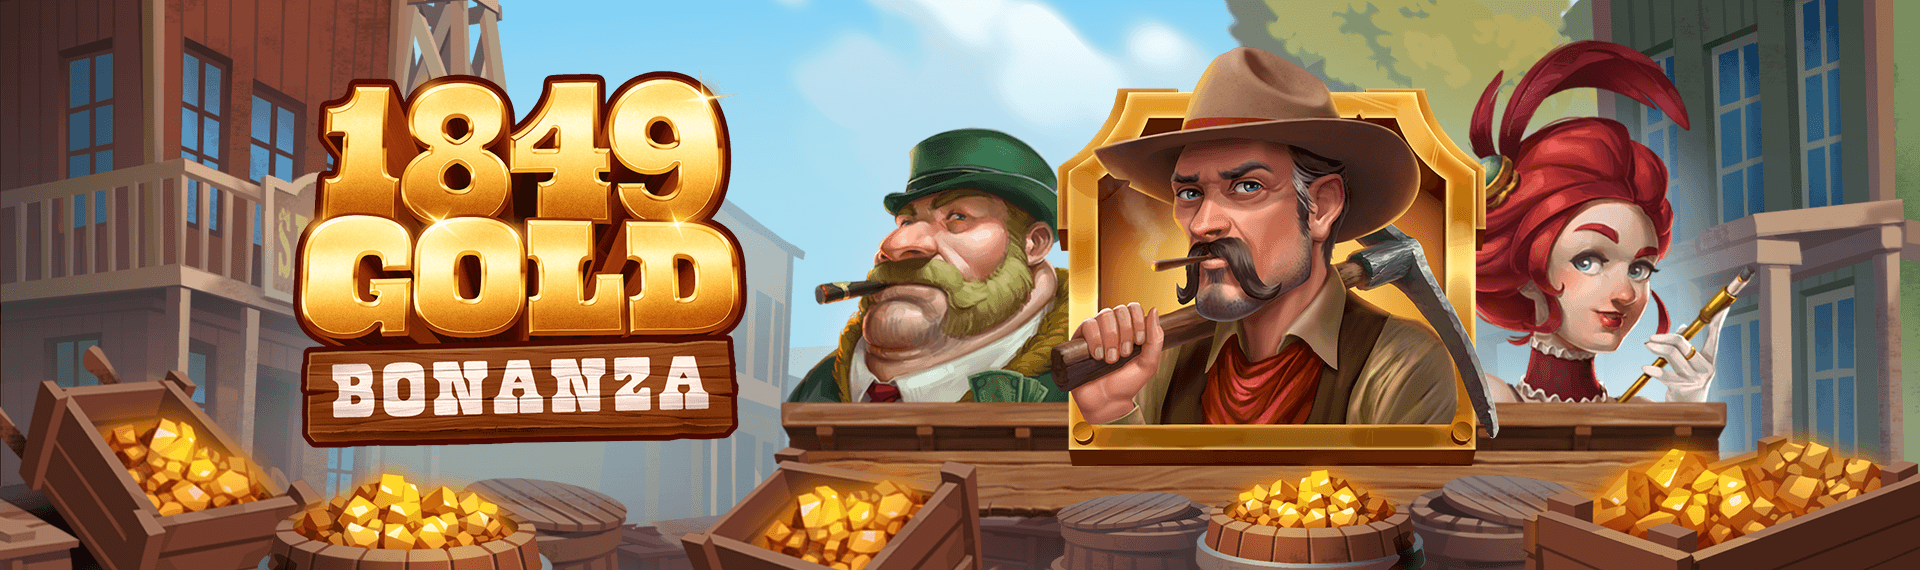 1849 Gold Bonanza Screenshot <br />
<b>Notice</b>:  Undefined variable: key in <b>/var/www/html/wp-content/themes/armadillo/page-game.php</b> on line <b>37</b><br />
1